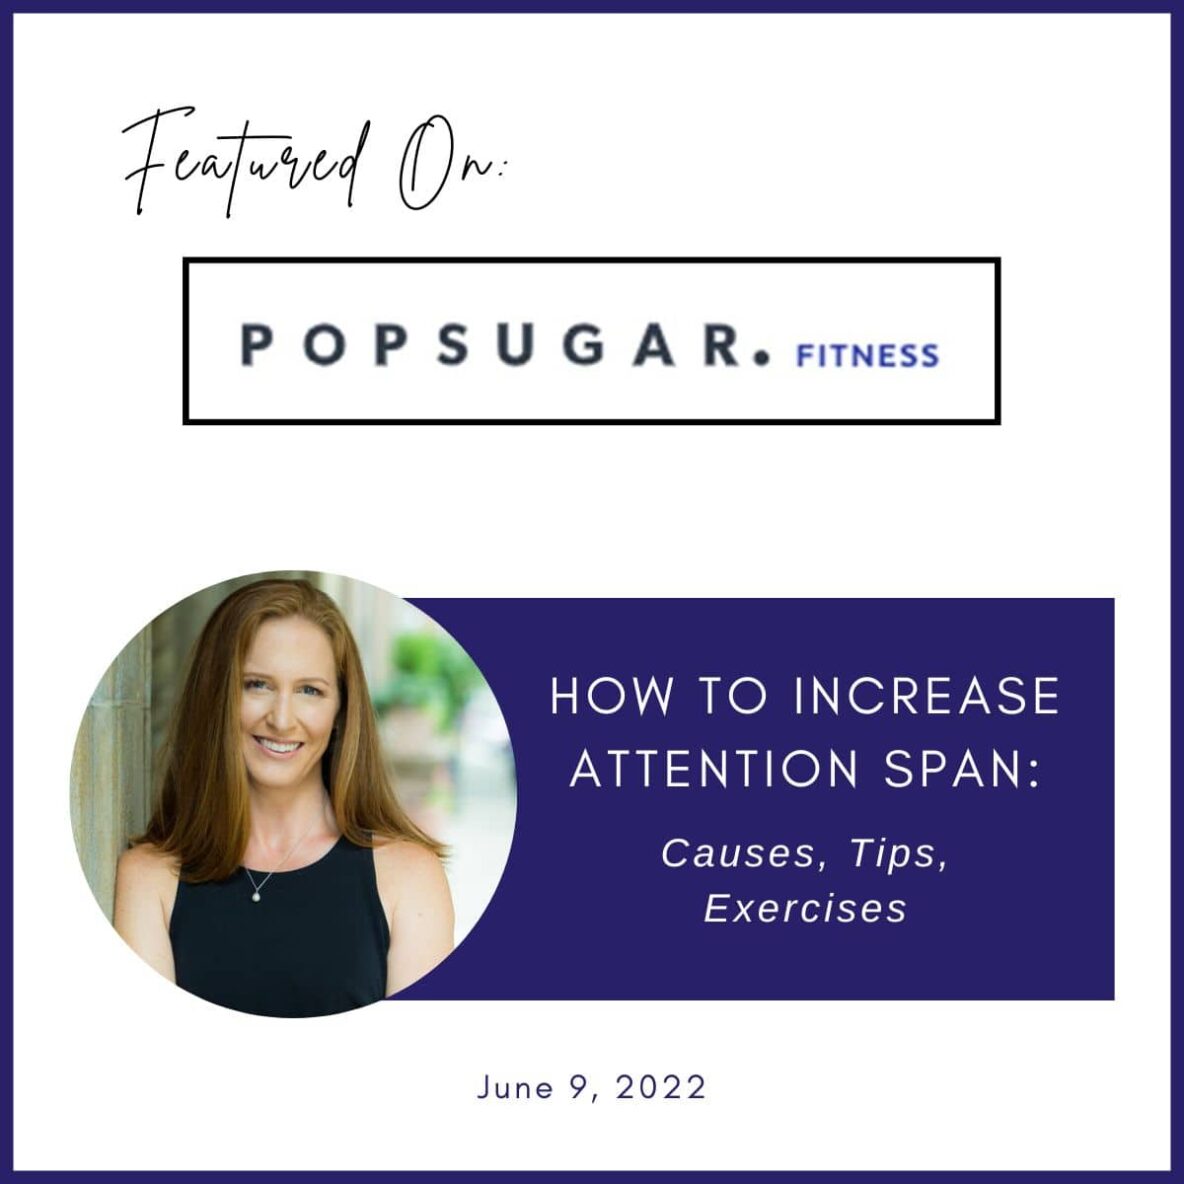 Popsugar - How to Increase Attention Span